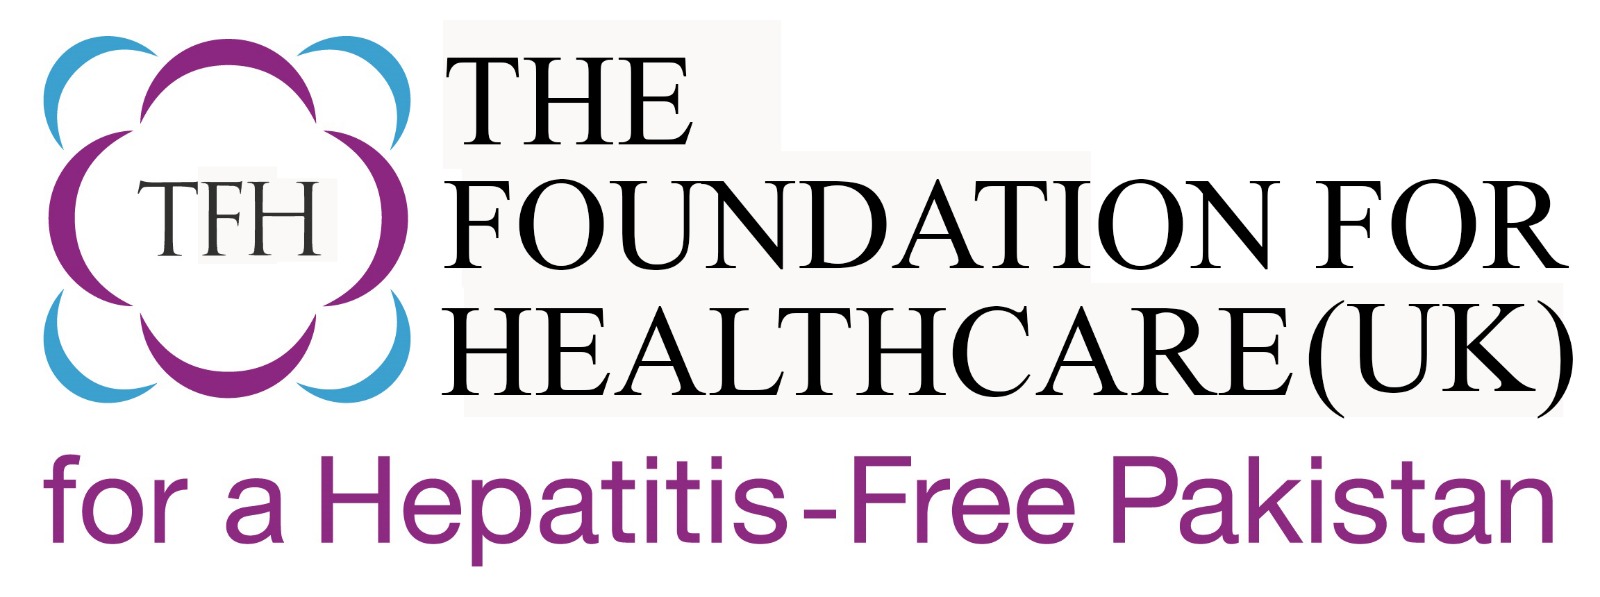 The Foundation for Healthcare